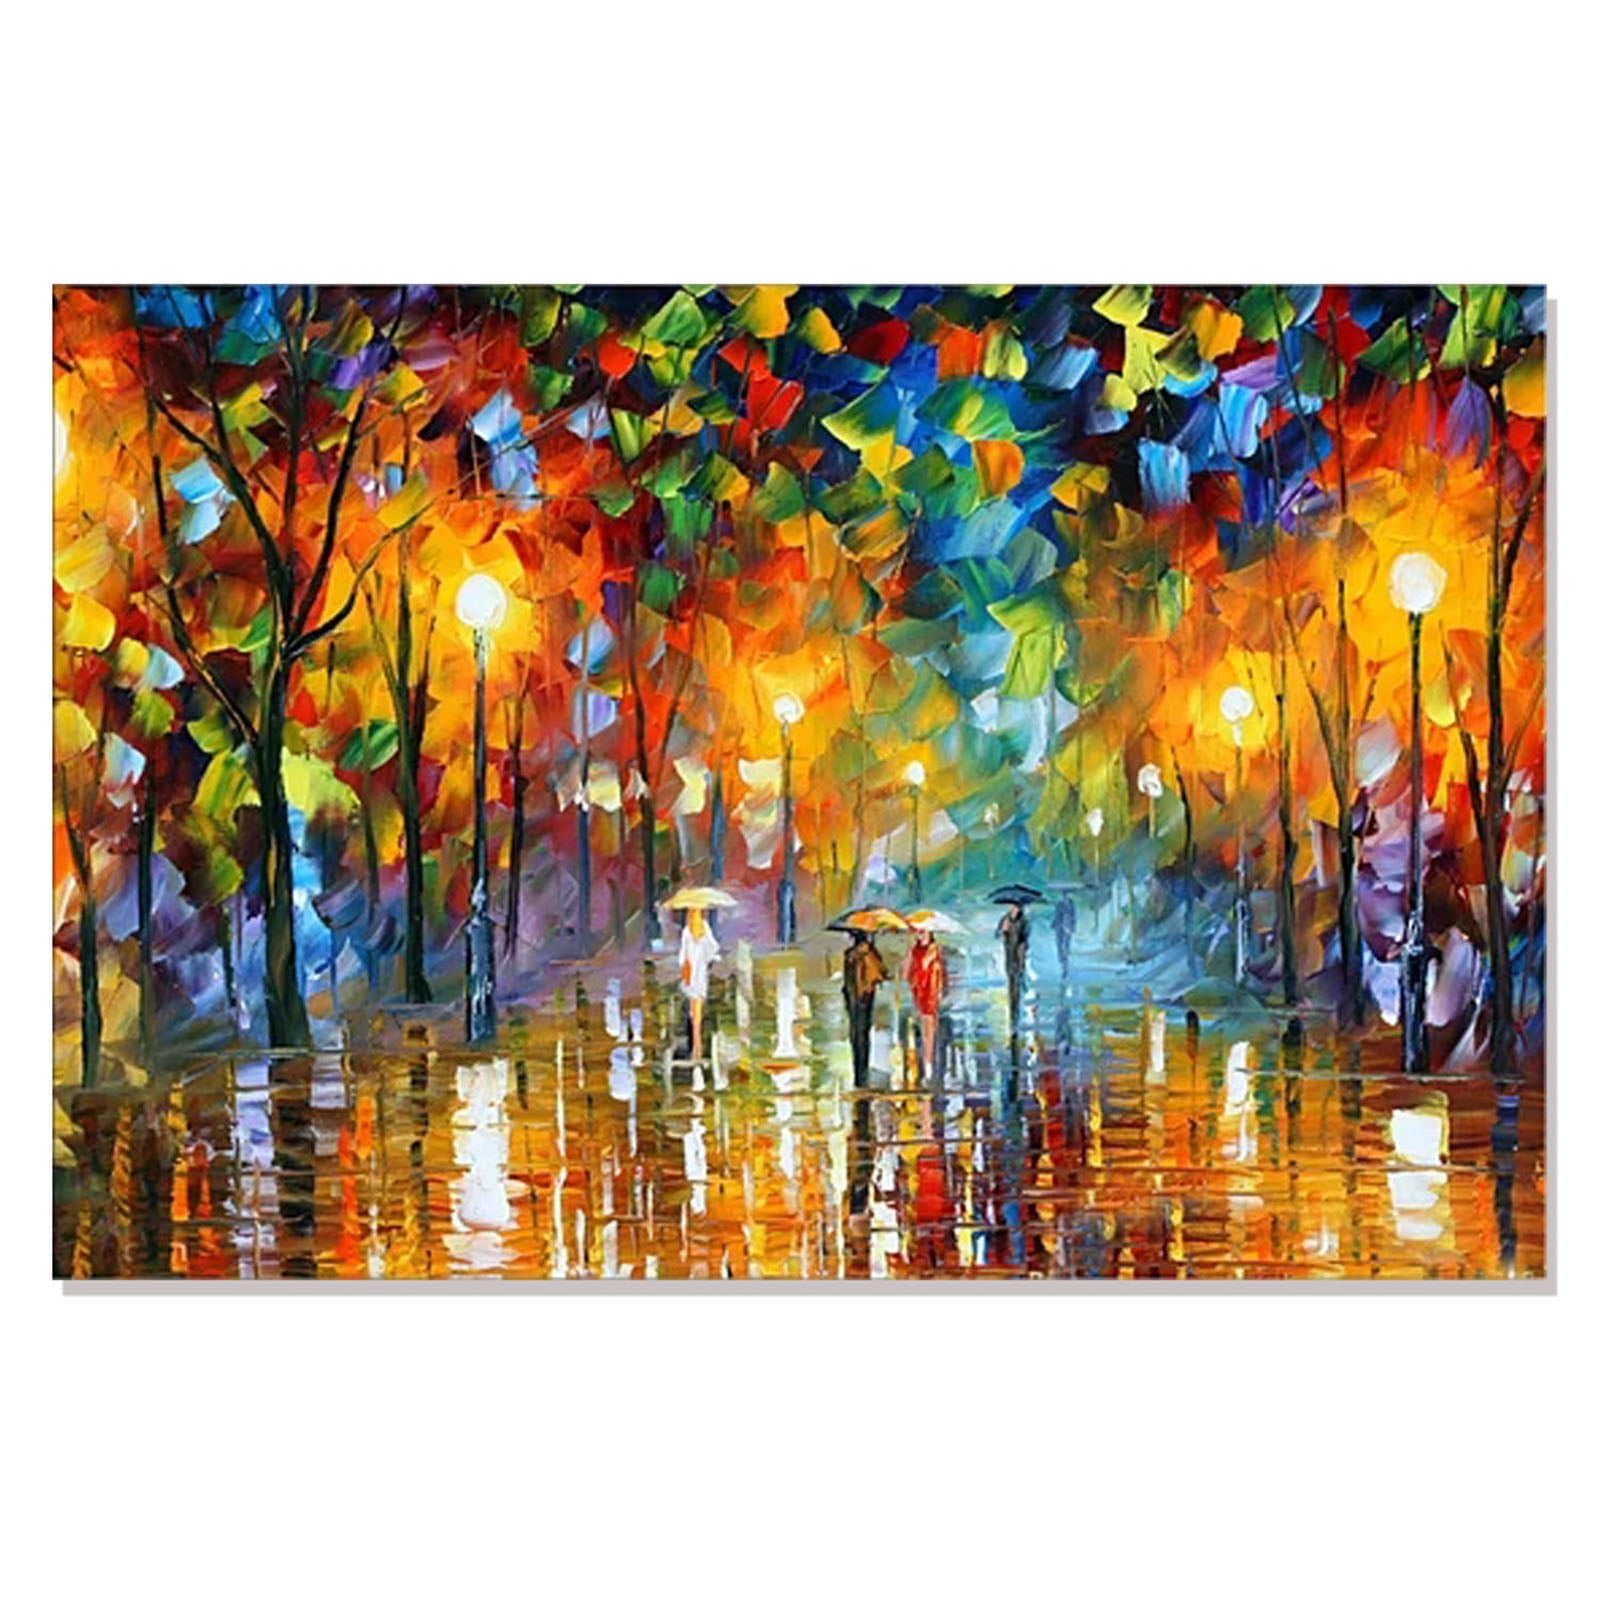 12"x16"Sexy beauty in the rain HD Canvas Print Painting Home Room Decor Wall art 